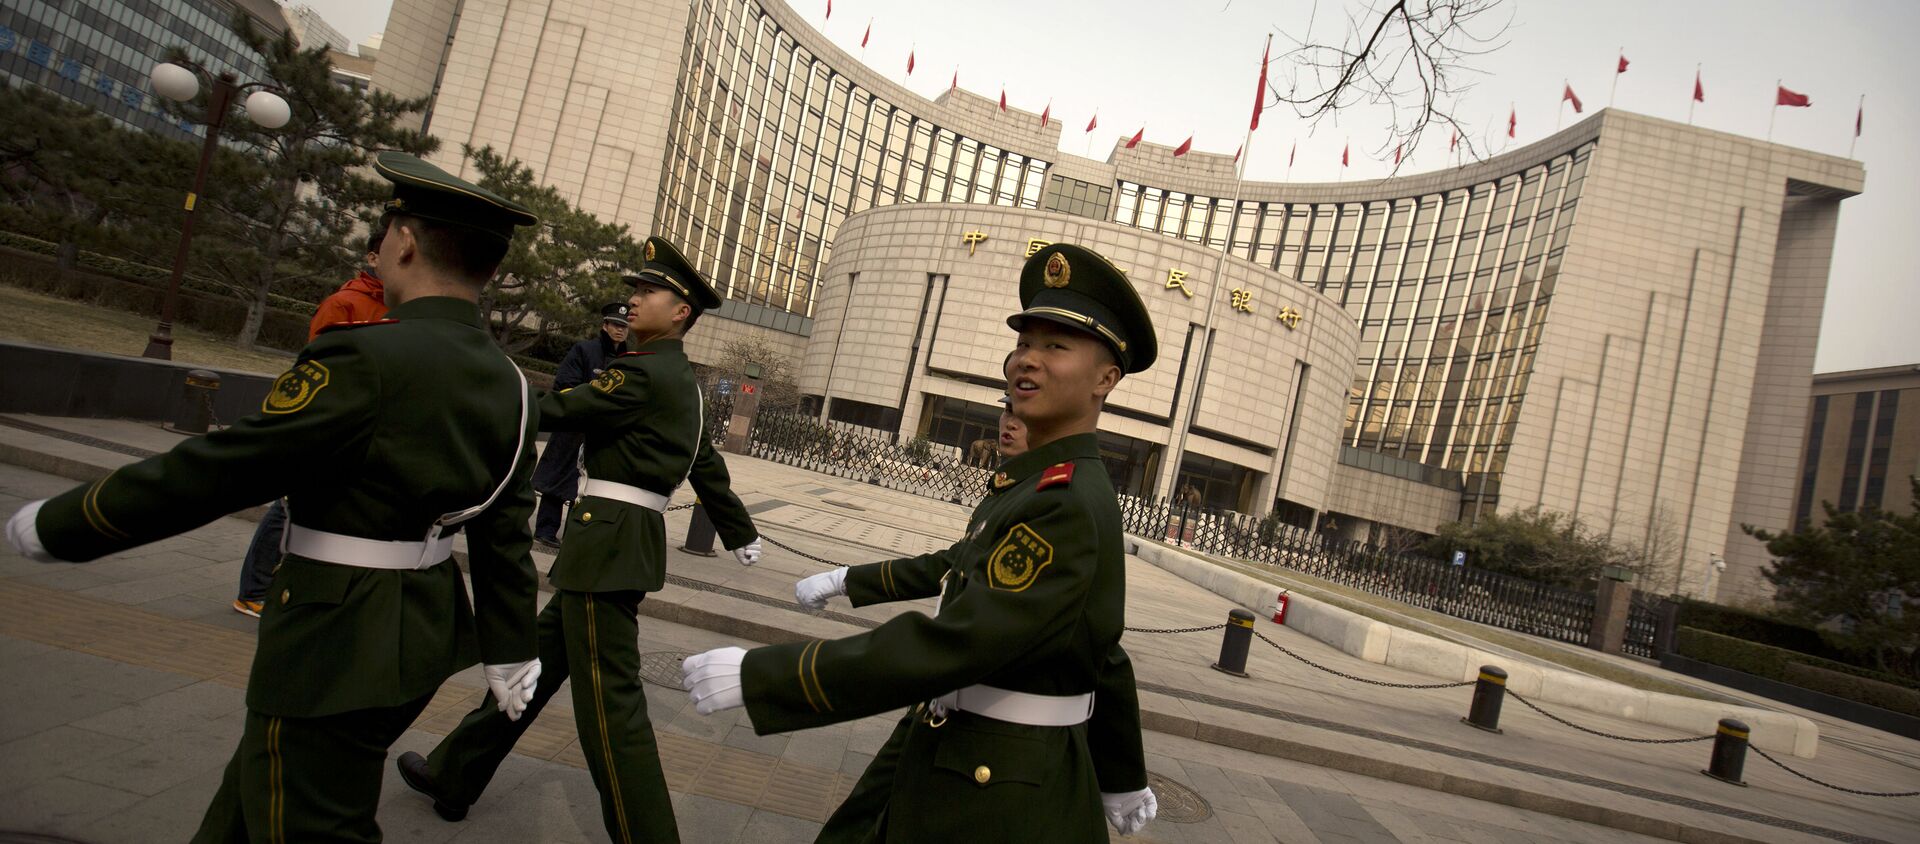 Chinese paramilitary police march past China's central bank, the People's Bank of China, in Beijing, Saturday, March 12, 2016 - Sputnik International, 1920, 28.01.2021